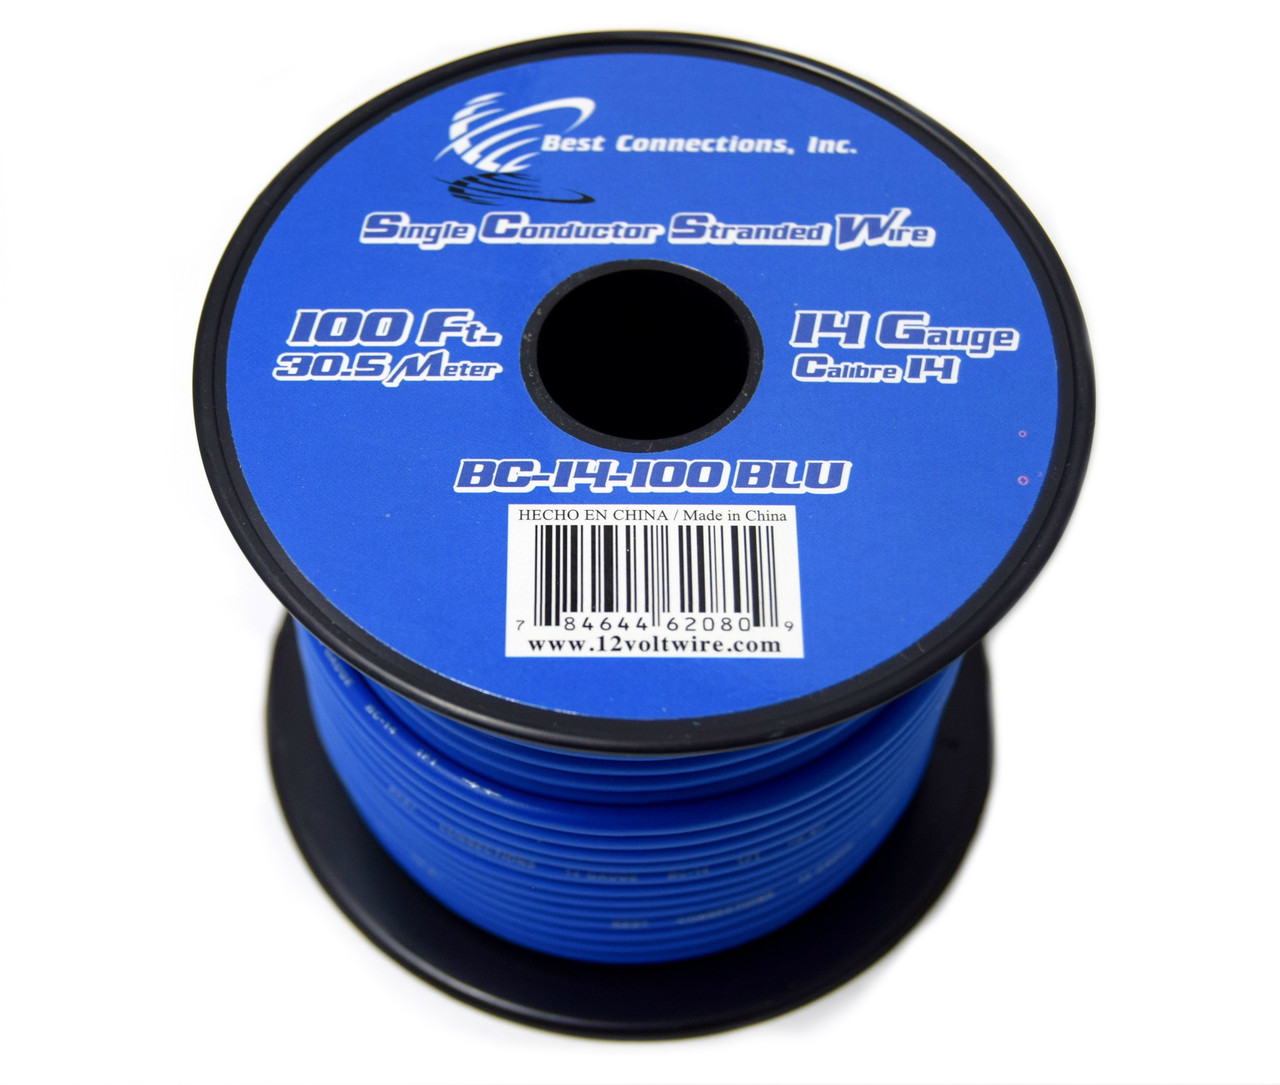 3 Spools 100 Feet 14 Gauge Power Remote Wire Cable Stranded Car Audio -  Best Connections